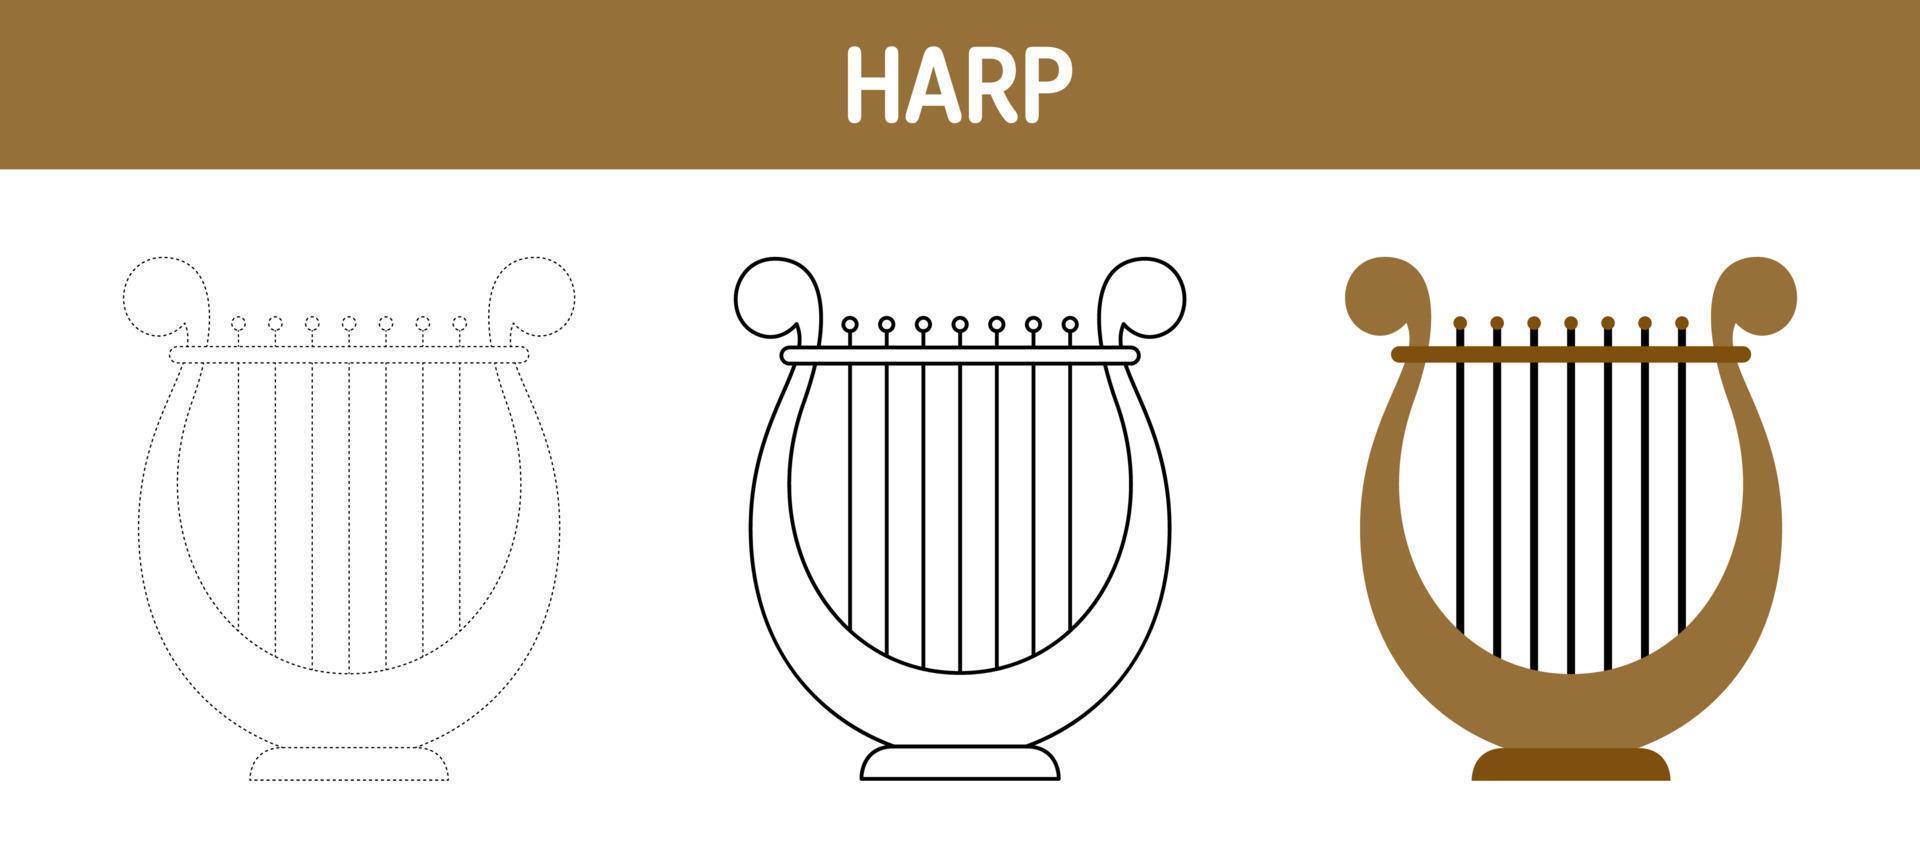 Harp tracing and coloring worksheet for kids vector